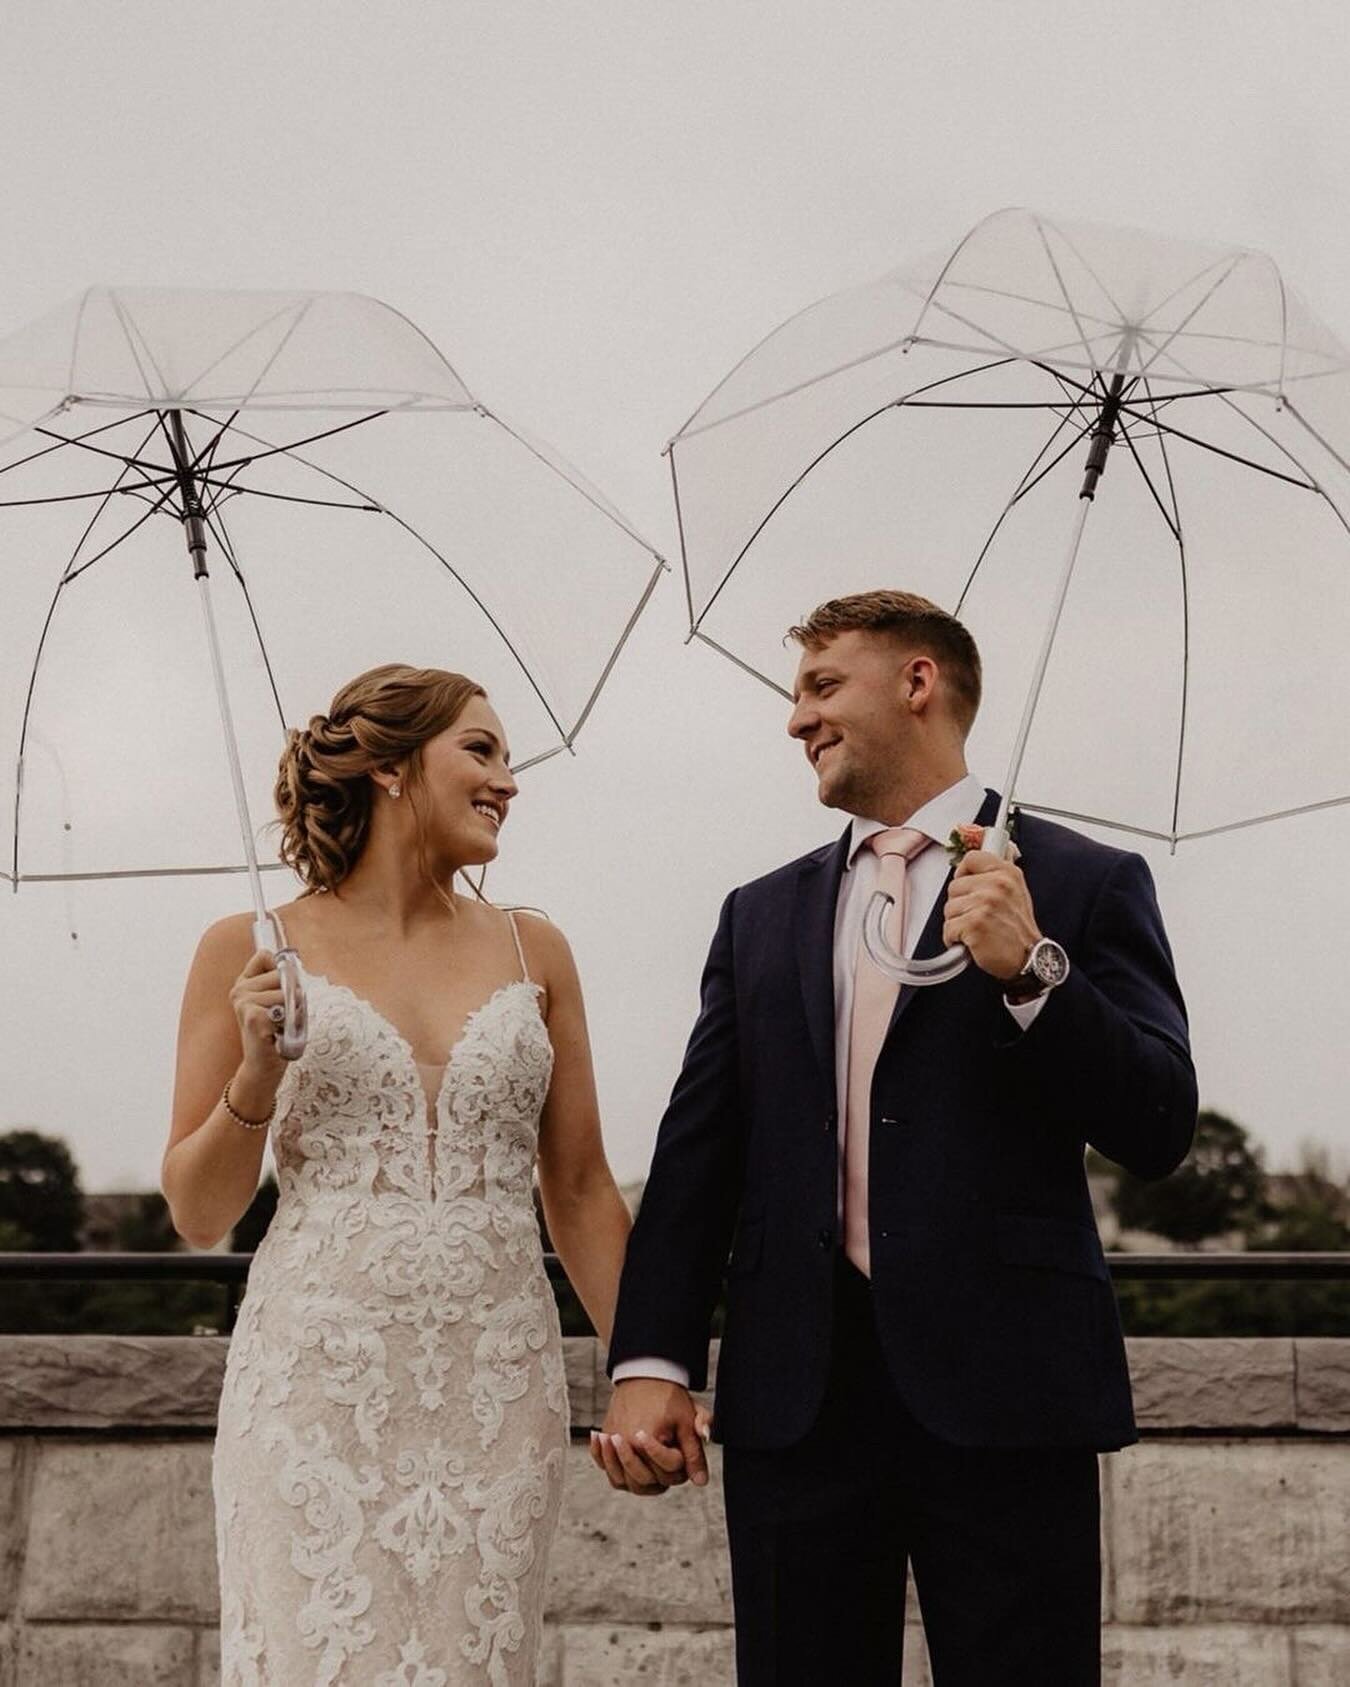 &ldquo;Two love birds ready for anything! The rain may come the wind may blow but we can rest knowing we have each other.&rdquo; -Krystal.  Carousel by @nicolenerostudio
 Photo by @3gracesbridal

Beauty Team: #krystalrosestudios
Makeup &amp; Hair: @k